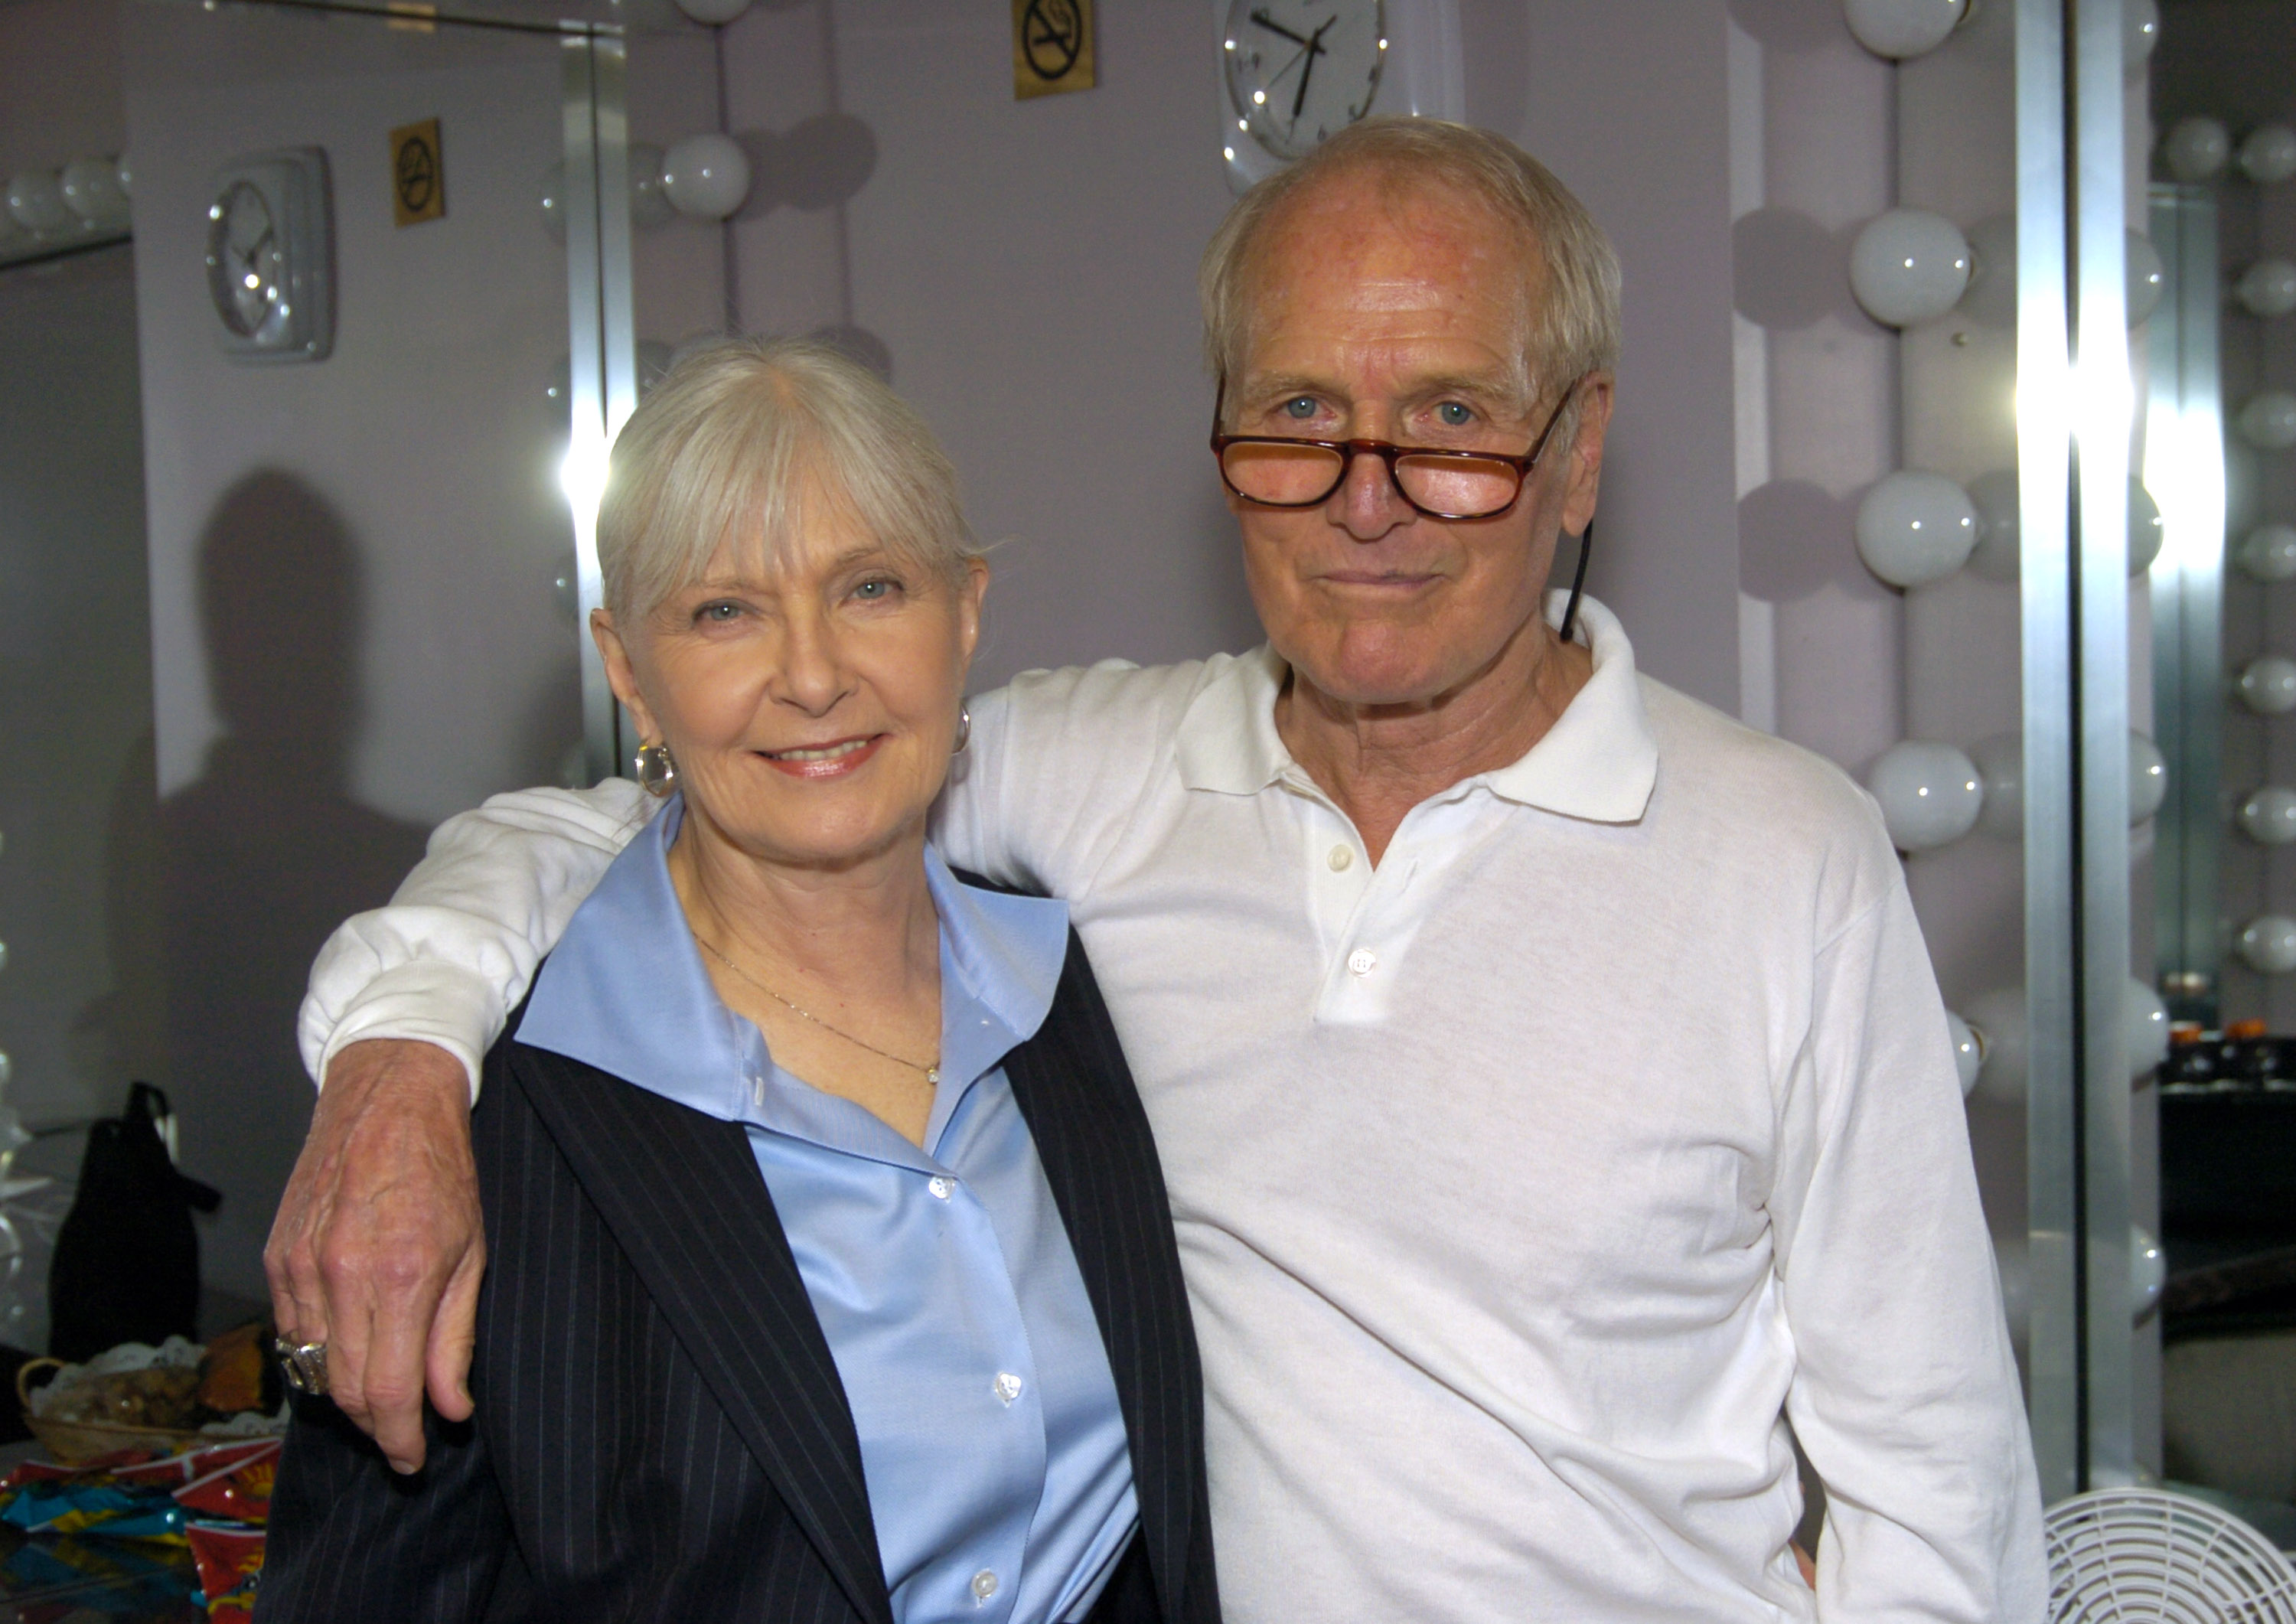 Joanne Woodward and Paul Newman backstage at Radio City Music Hall in New York City for "A Change Is Going To Come: A Concert for John Kerry" on Thursday, July 8, 2004. The event benefitted Kerry Victory 2004. | Source: Getty Images